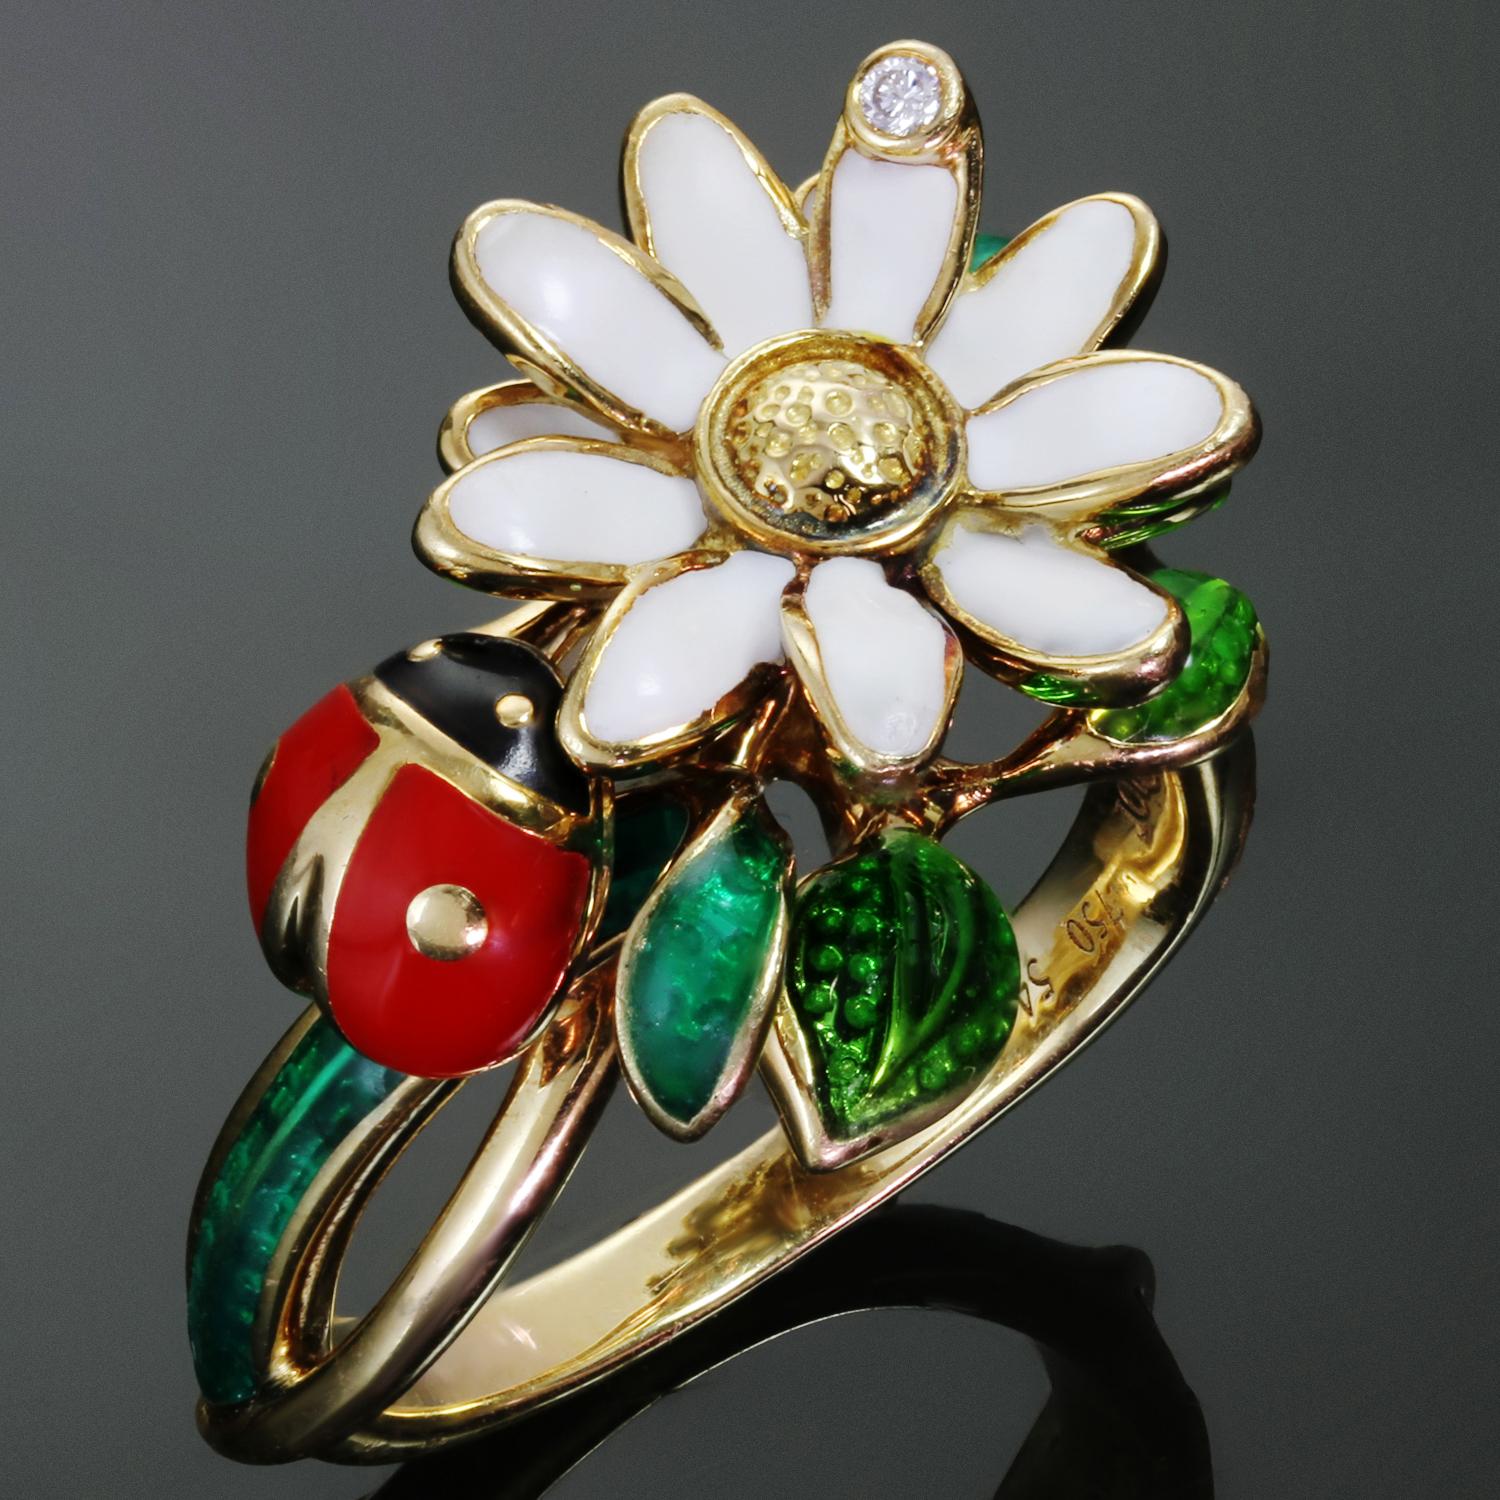 This fantastic Christian Dior ring from the colorful Diorette collection is inspired by Dior's garden in Milly-la-Forêt and features a vibrant floral arrangment accented with a ladybug, crafted in 18k yellow gold, lacquer, and enamel and accented